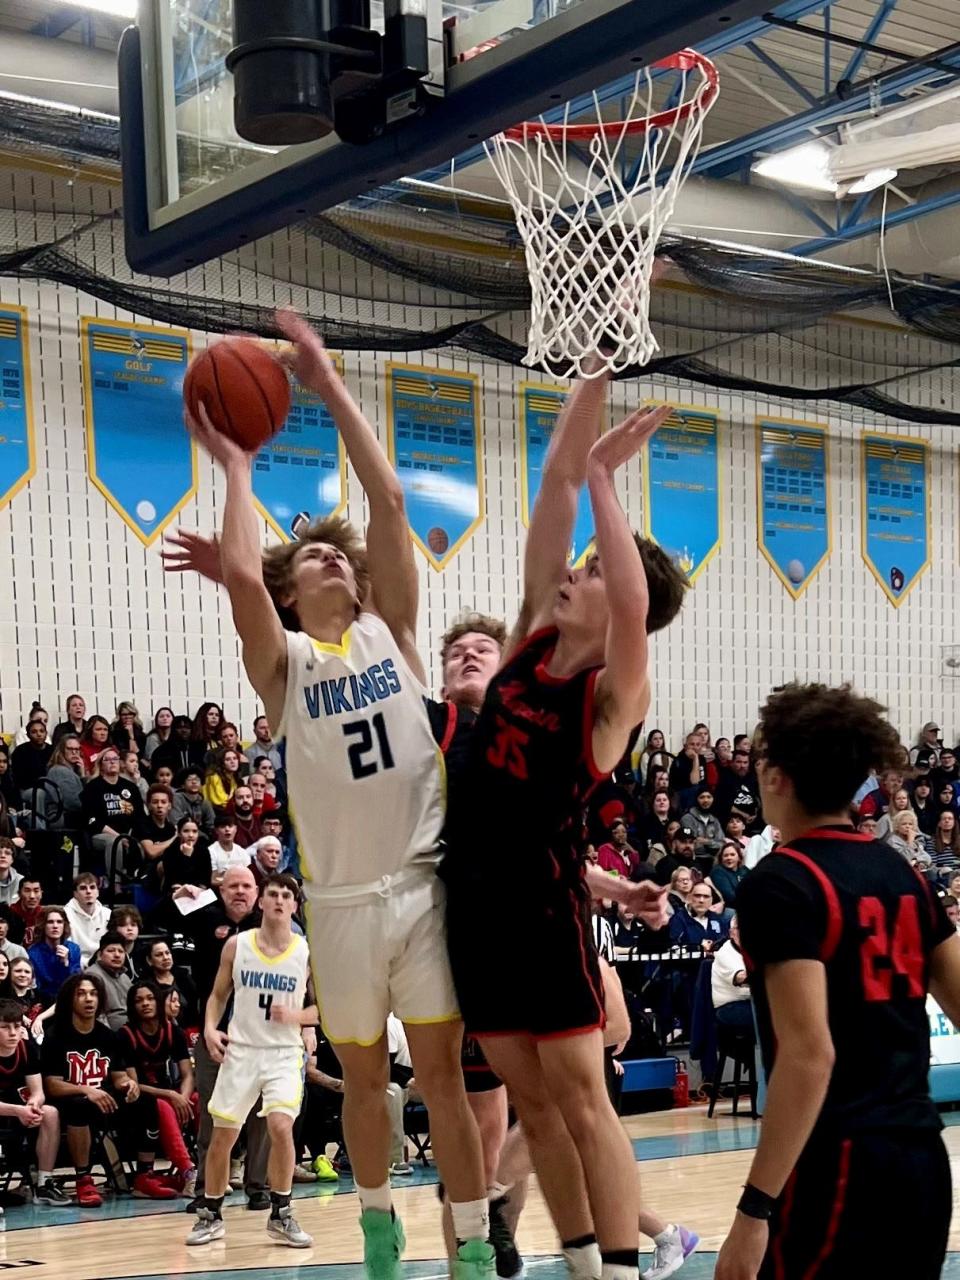 River Valley's Ayden Kenney shoots a layup against the defense of Marion Harding's Boston Pearson during a boys basketball game Friday night at RV.